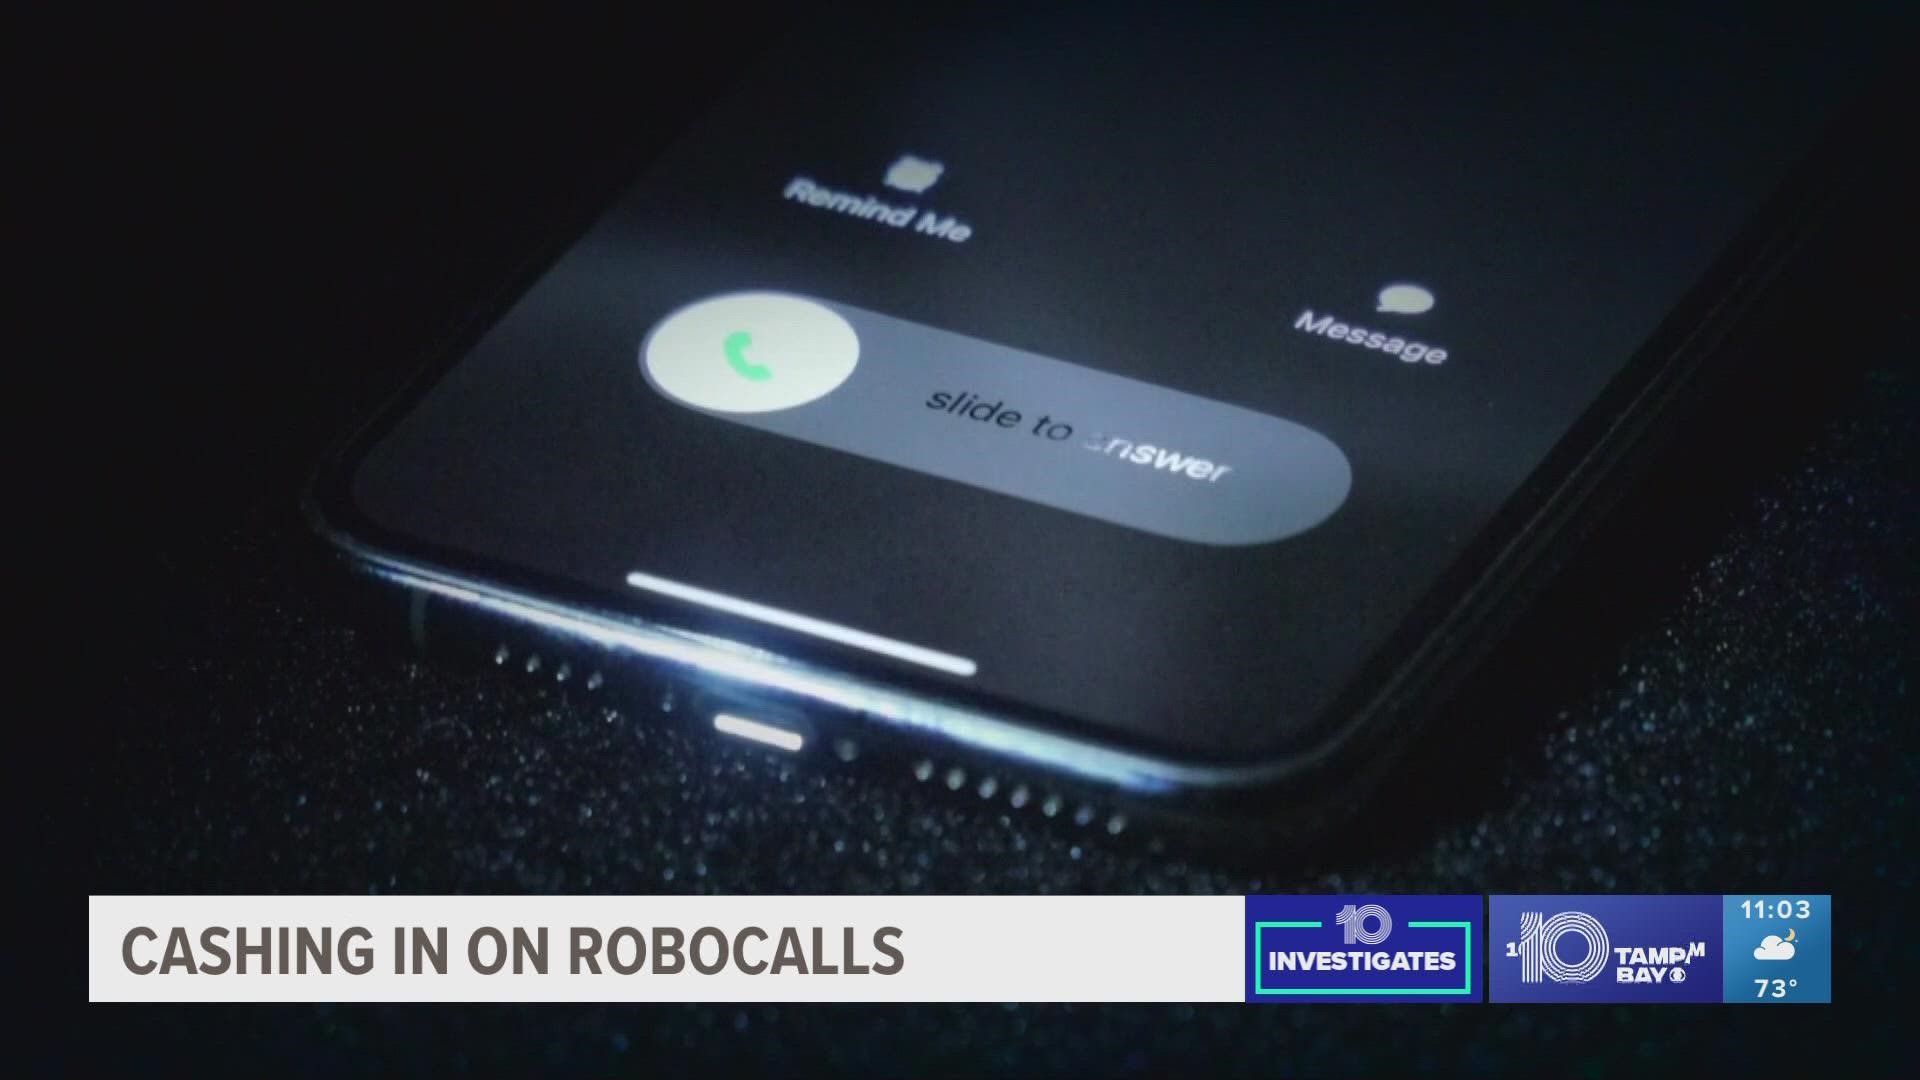 Adam Ward says he's practically tripled his cash over the last year, making thousands of dollars from trying to stop robocalls.